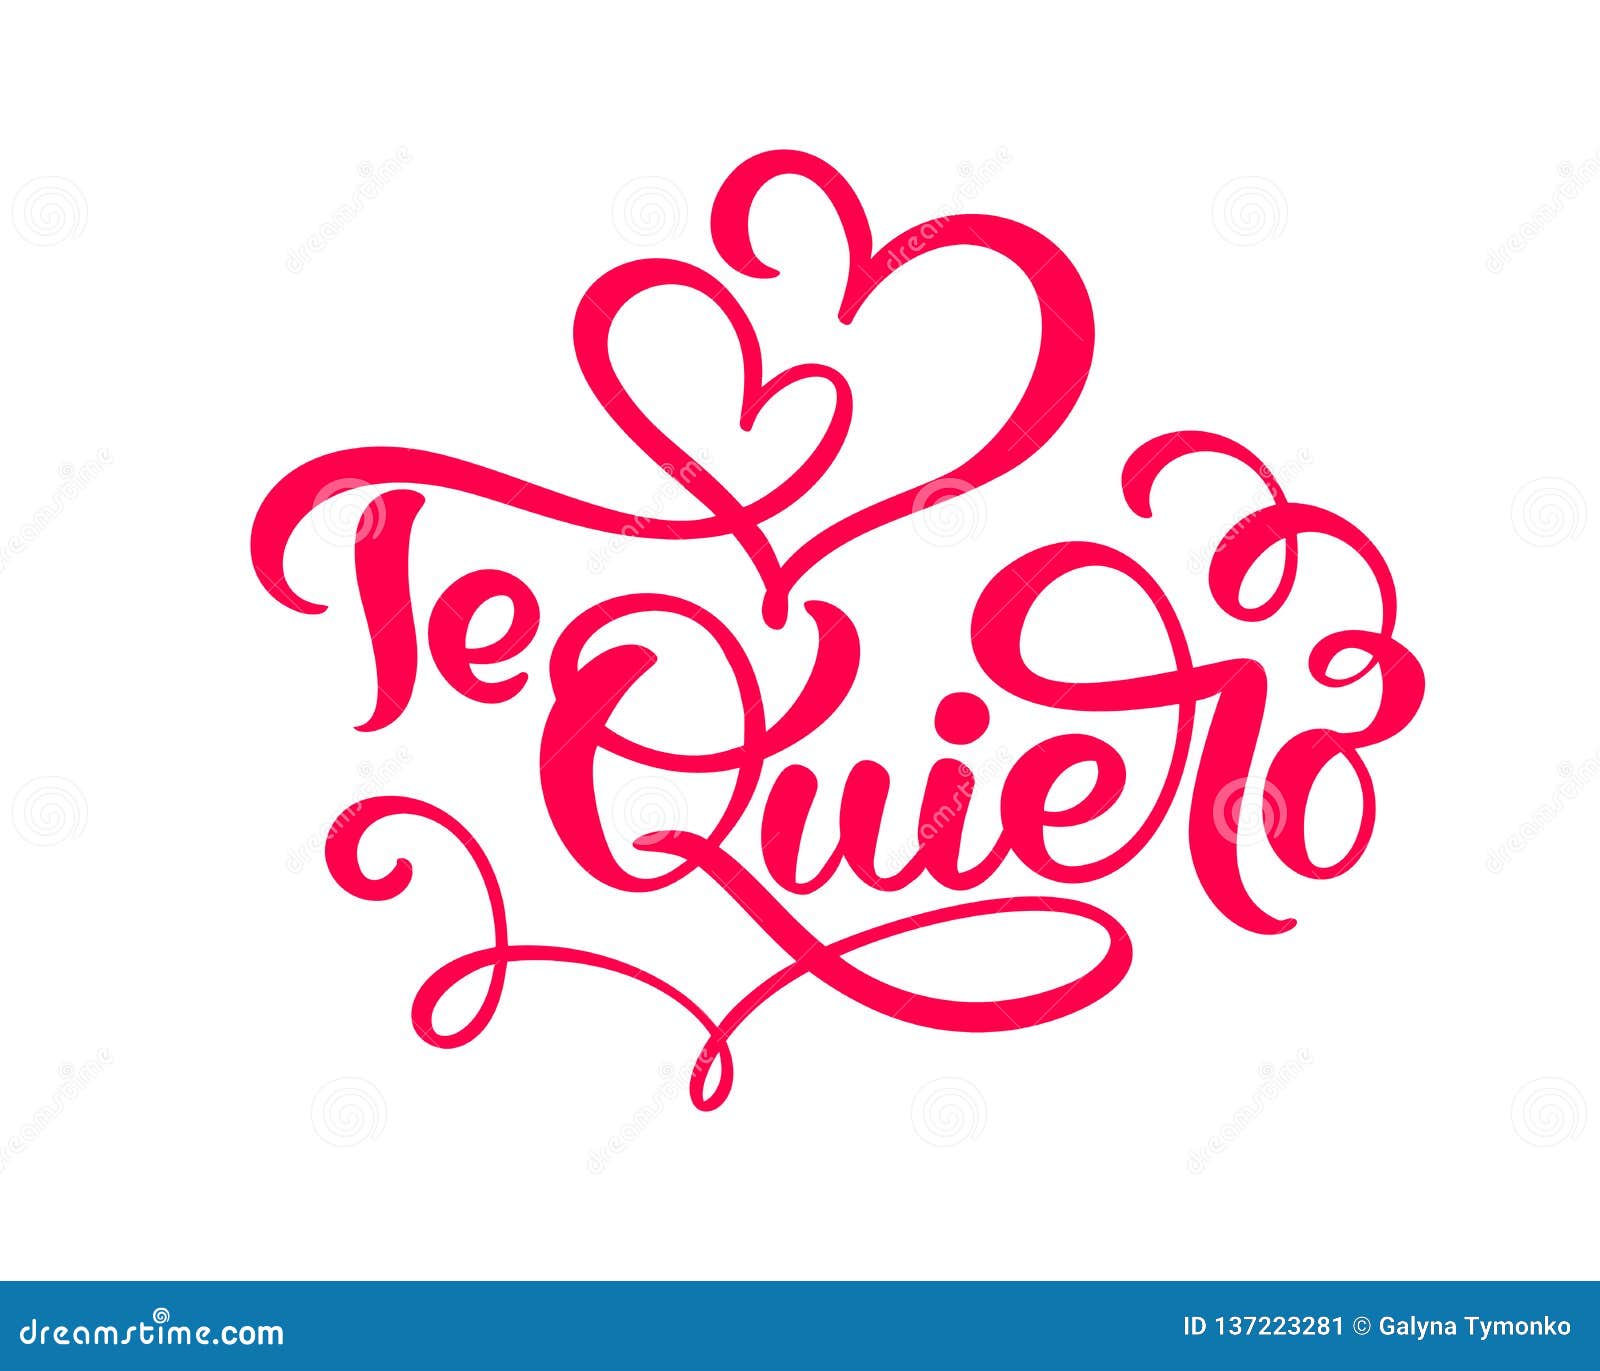 calligraphy red phrase te quiero on spanish - i love you.  valentines day hand drawn lettering. heart holiday sketch doodle